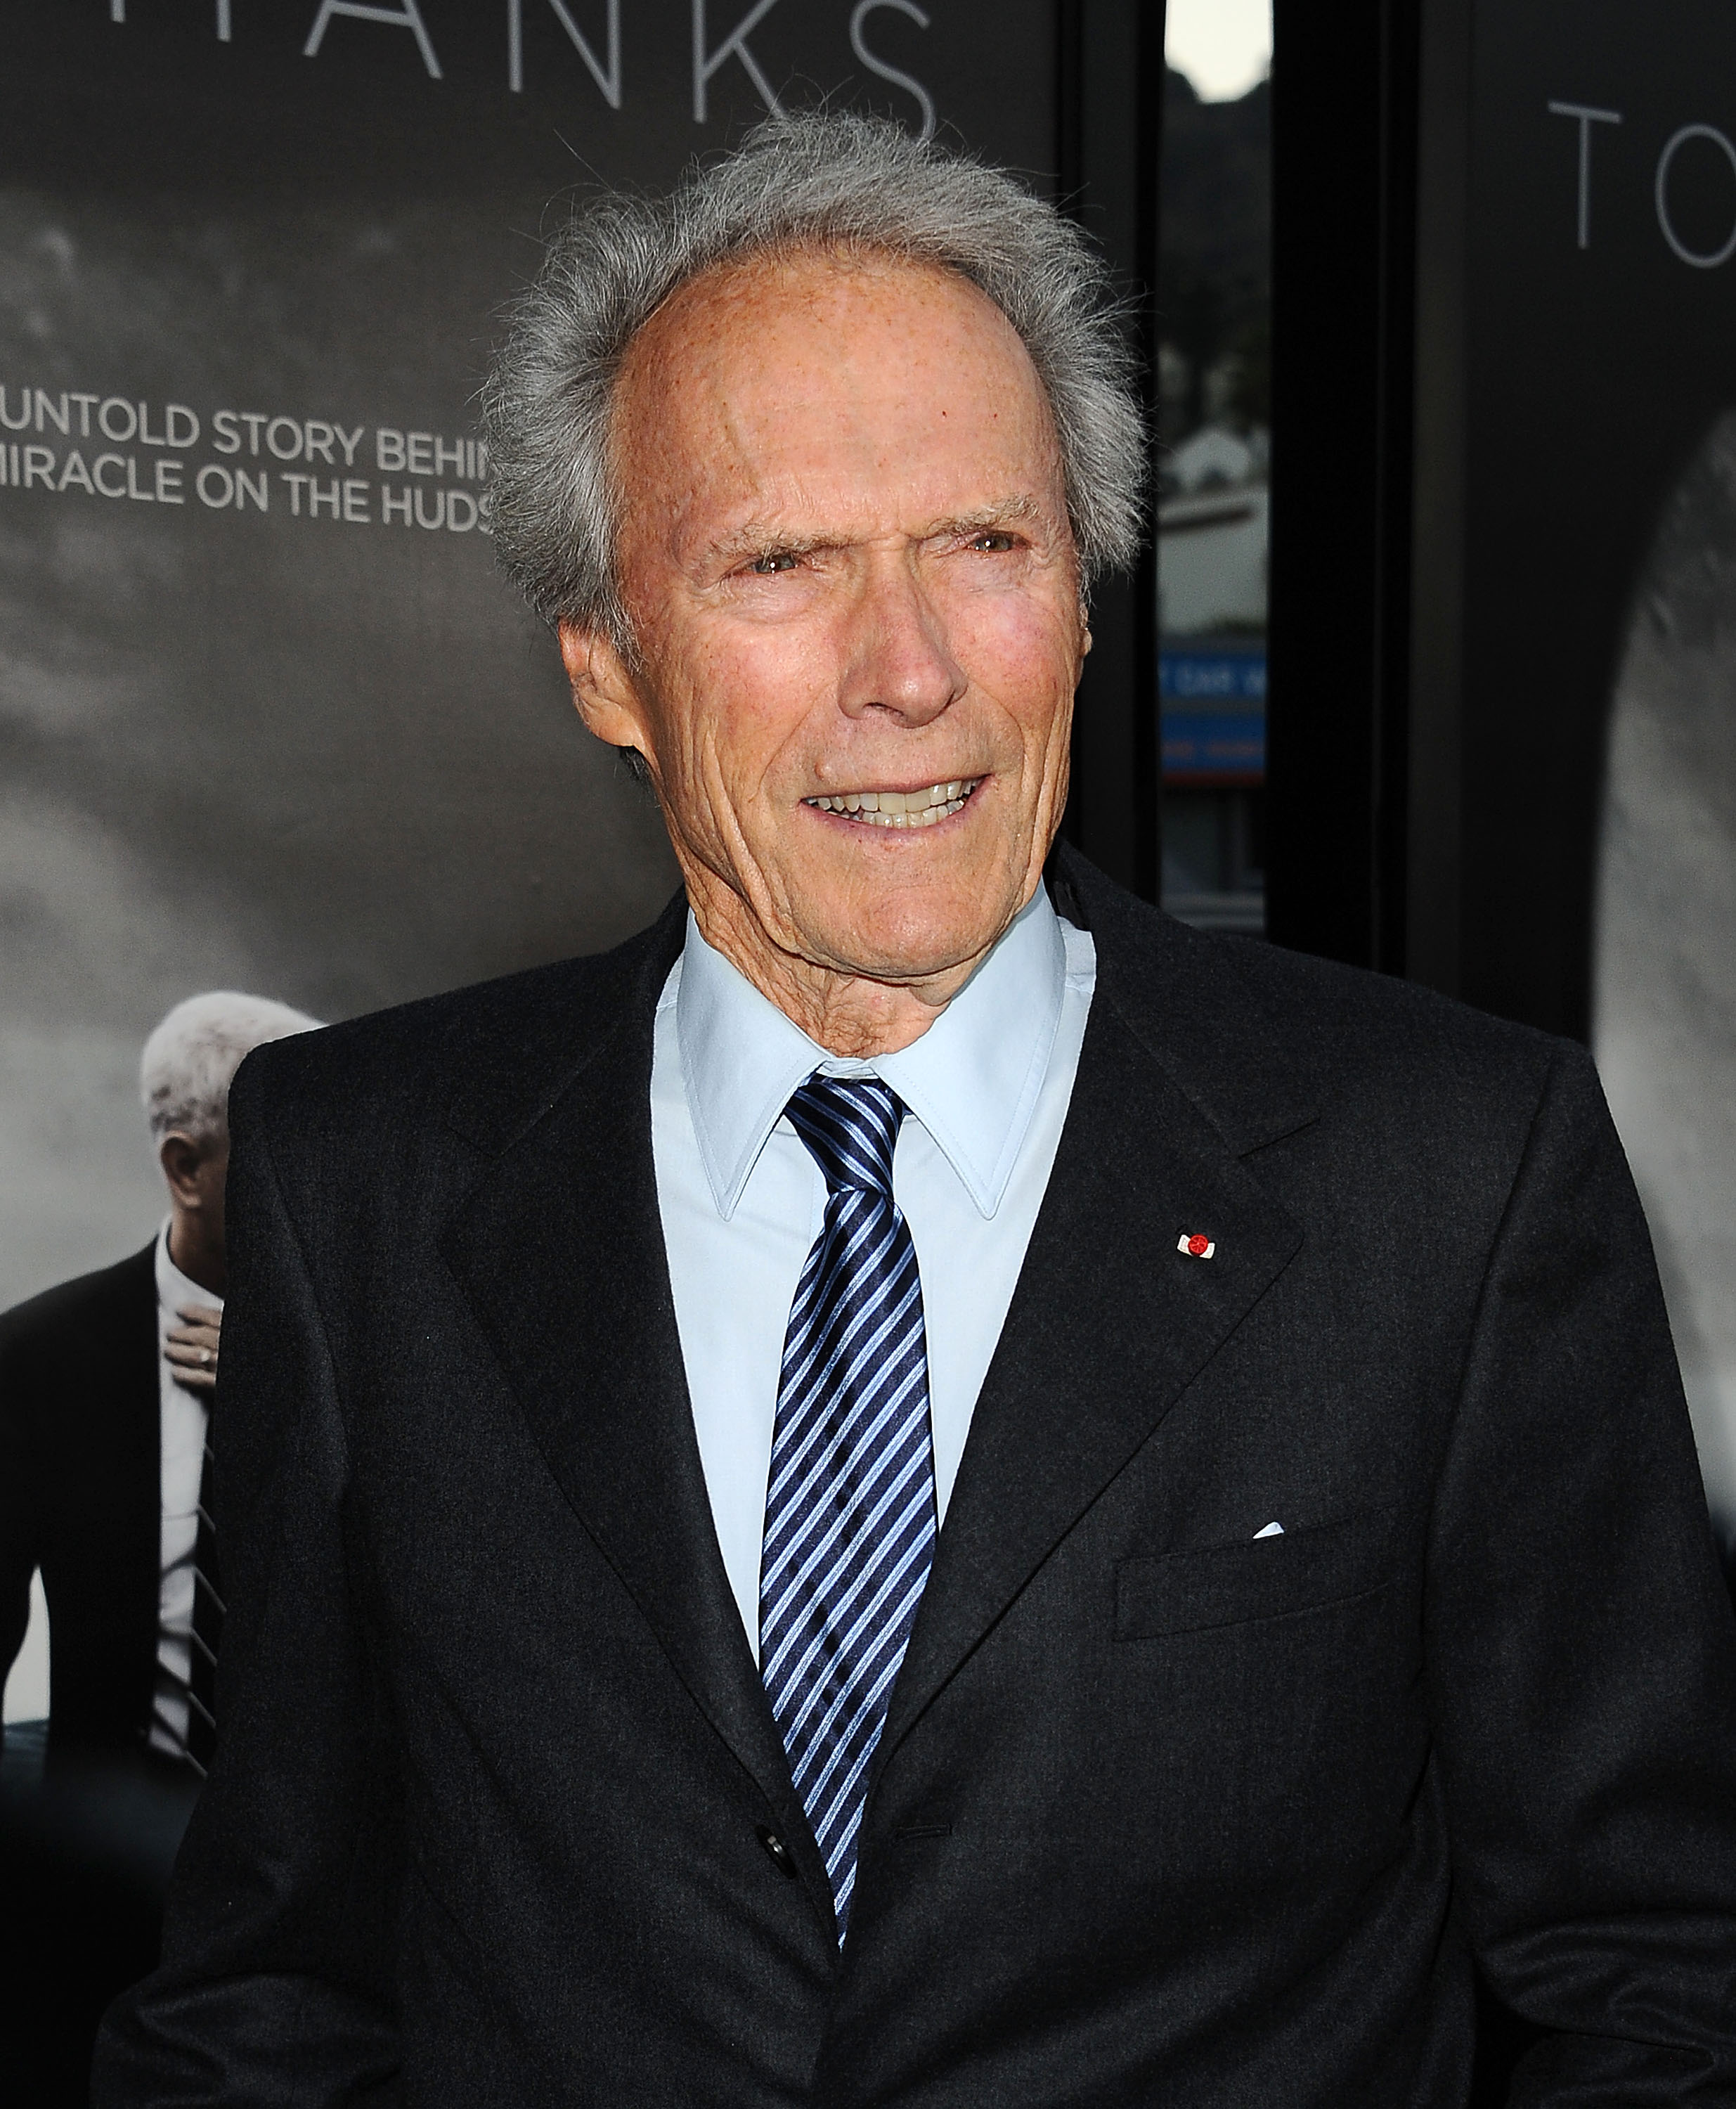 Clint Eastwood attends a screening of "Sully" at Directors Guild Of America in Los Angeles, California, on September 8, 2016. | Source: Getty Images